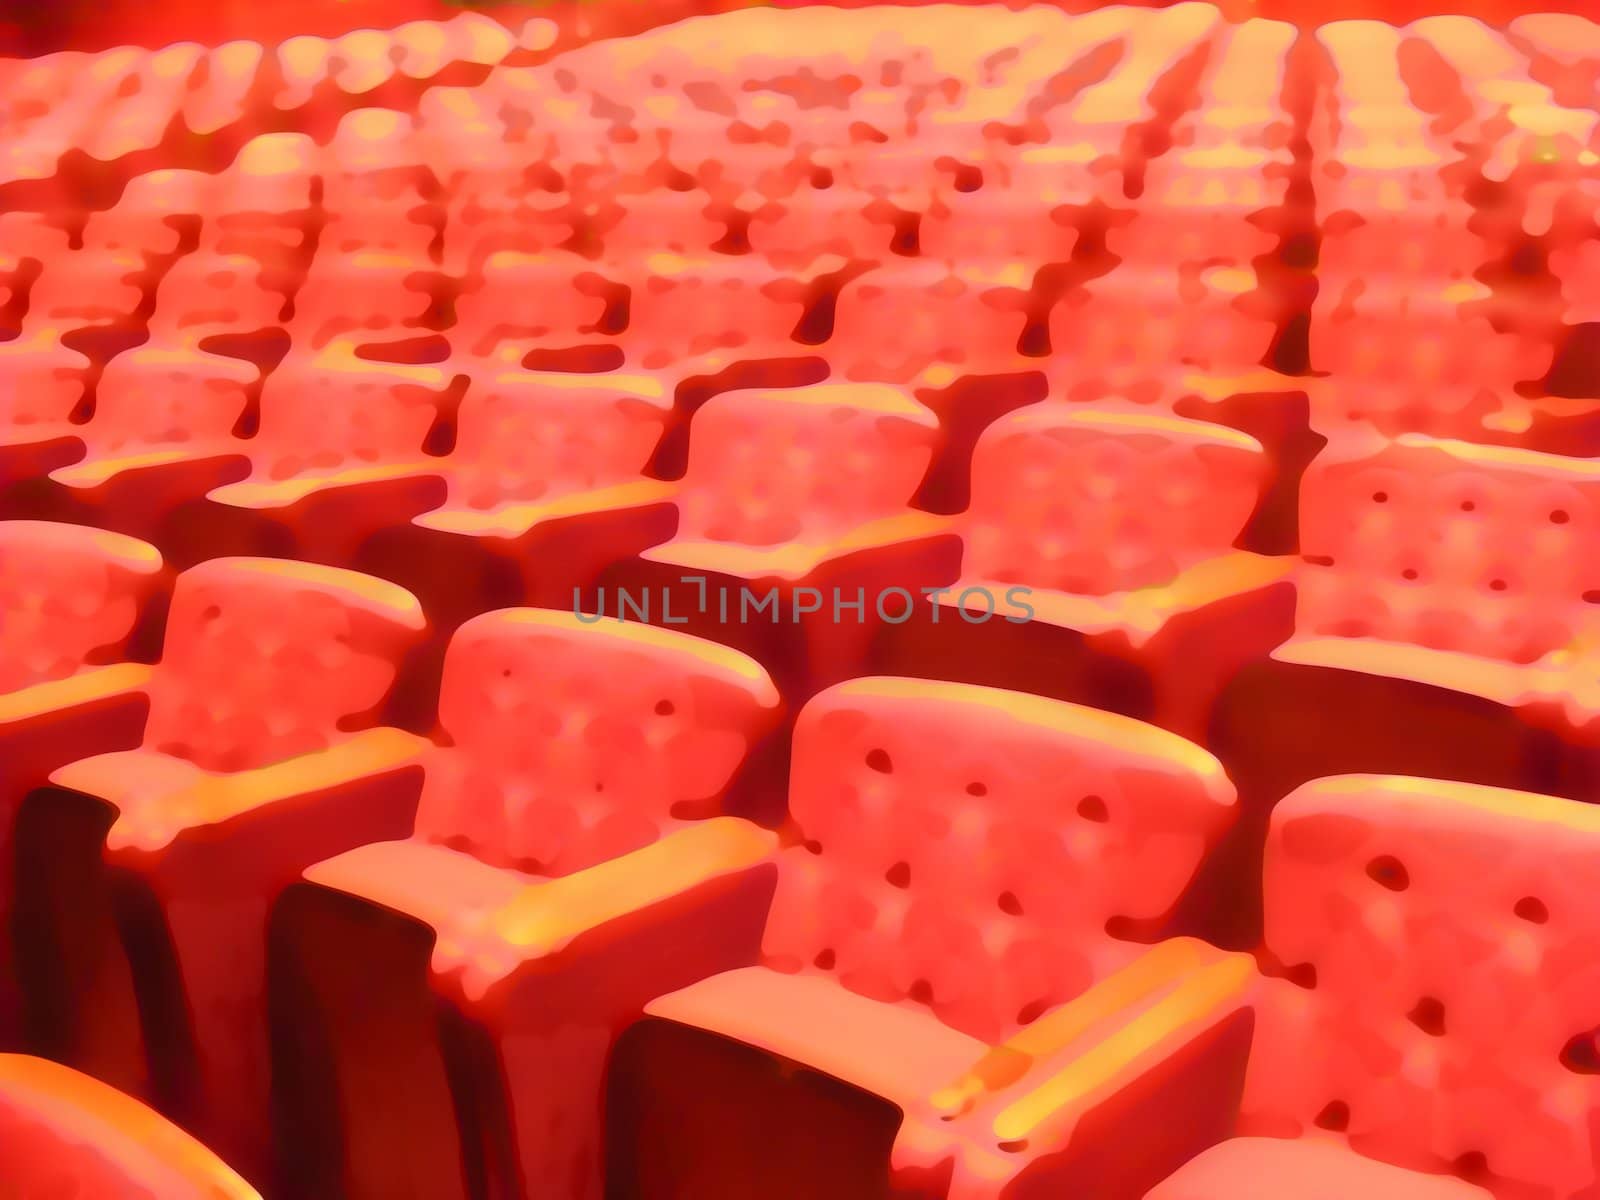 Abstract Illustration of cinema seating